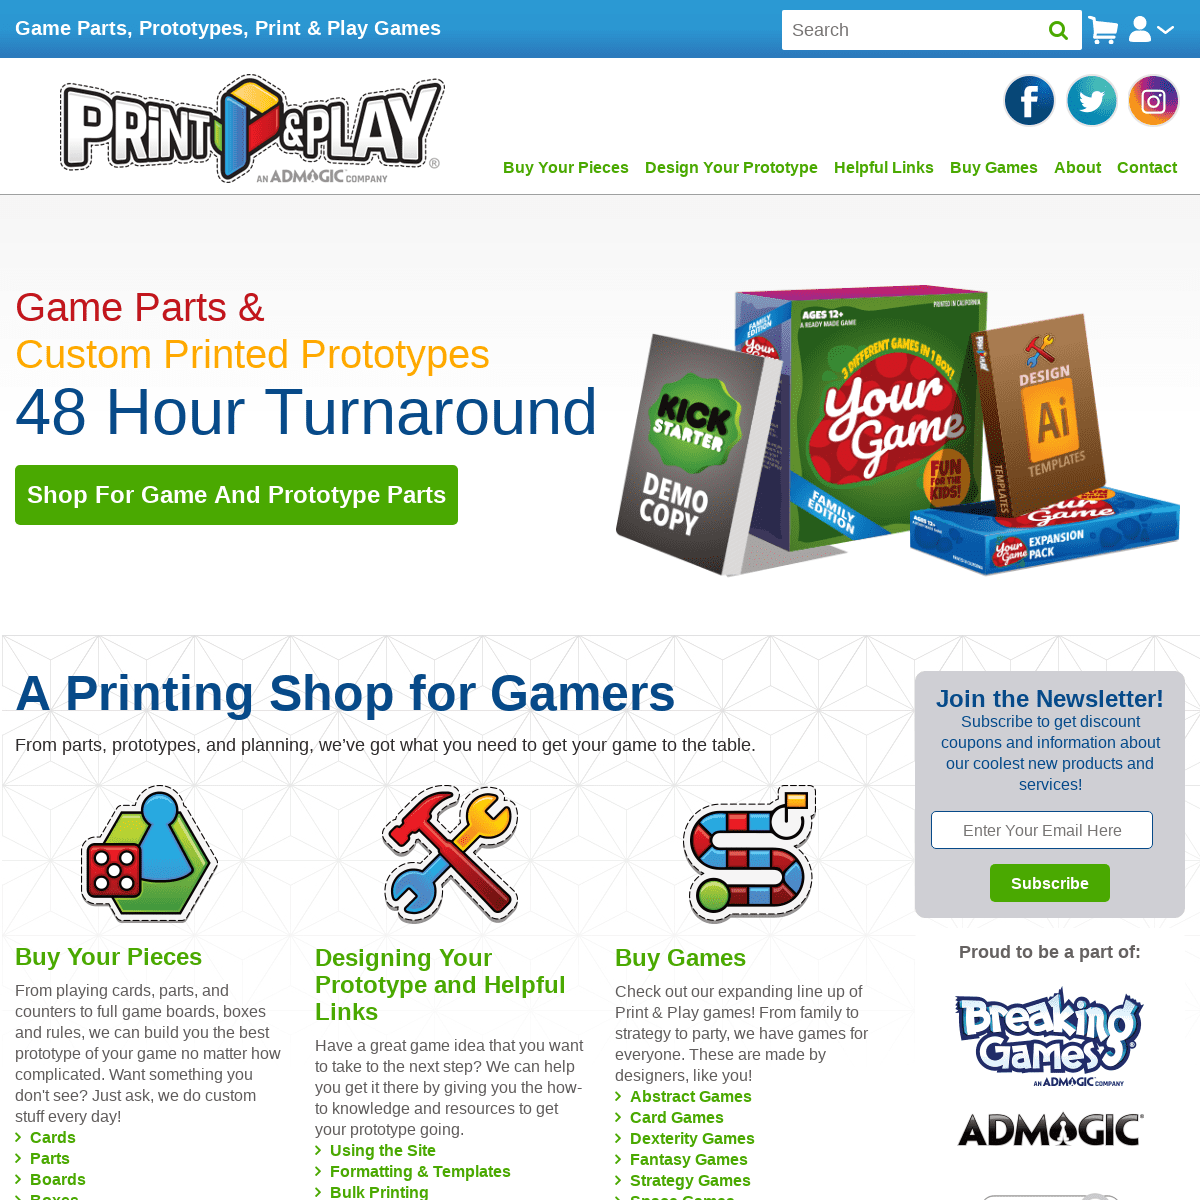 Print & Play - The Game & Prototype Printing Shop for Game Designers